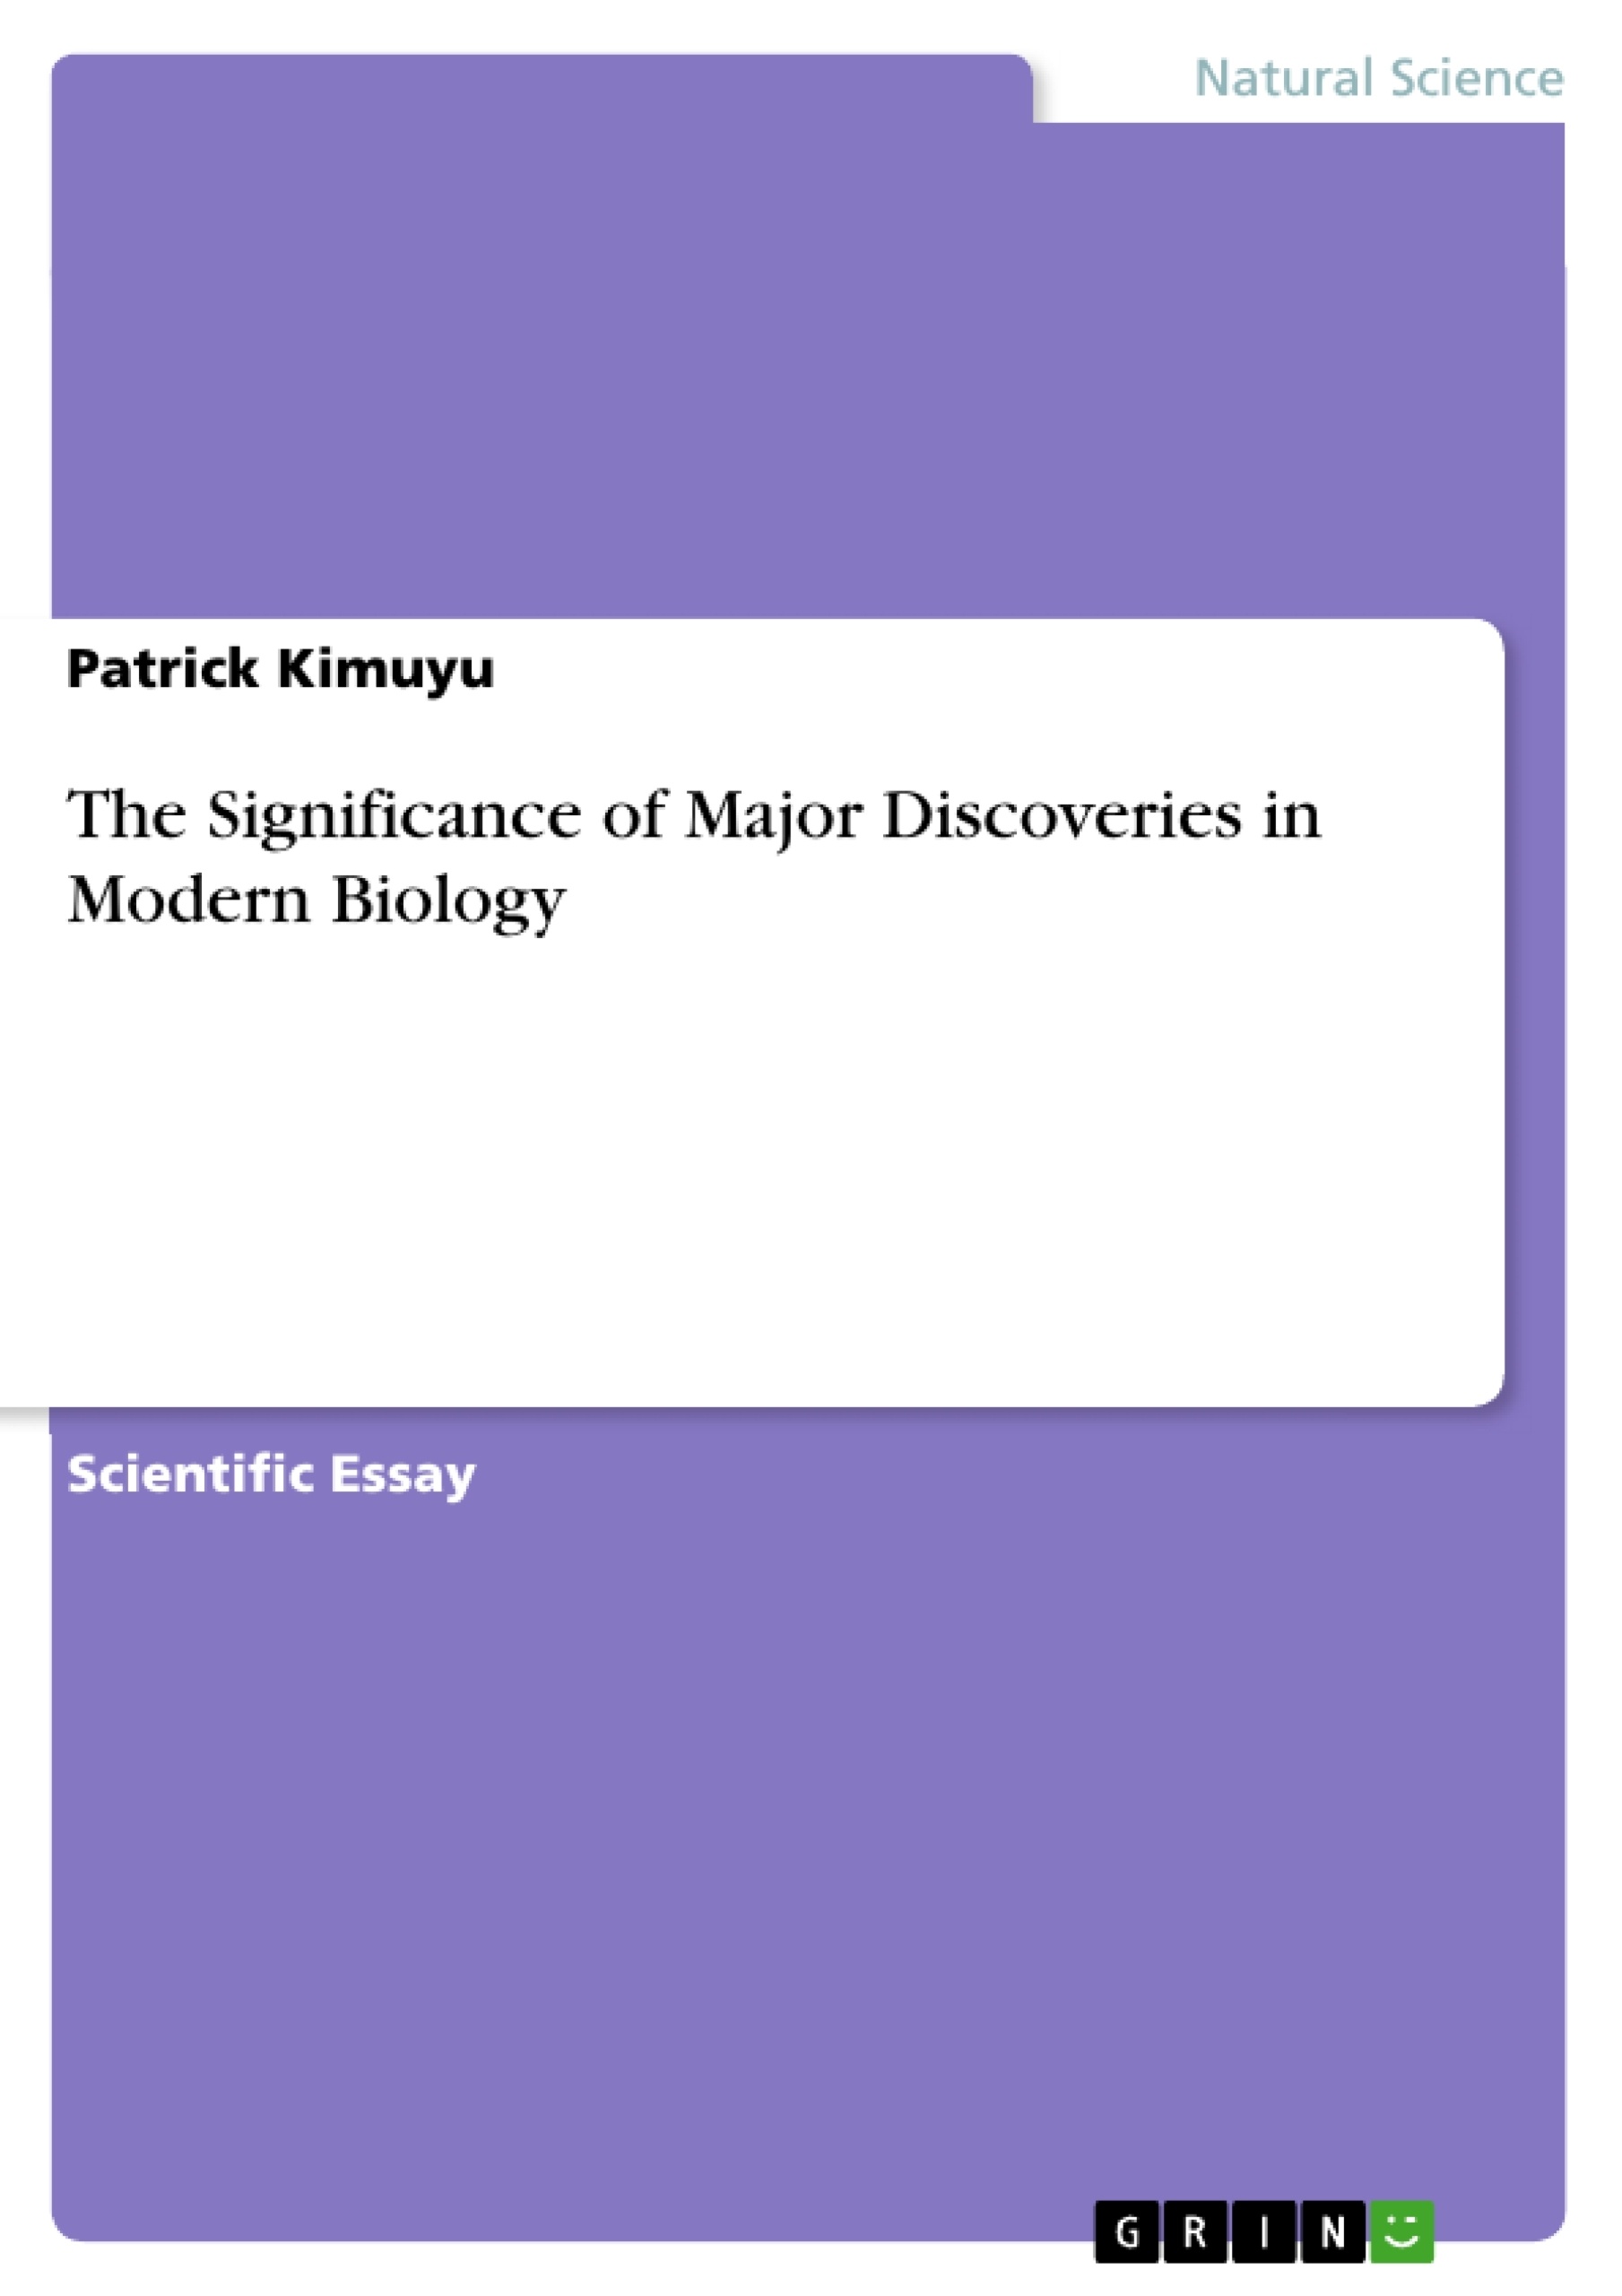 Discoveries　Biology　The　Modern　Major　in　of　Significance　GRIN